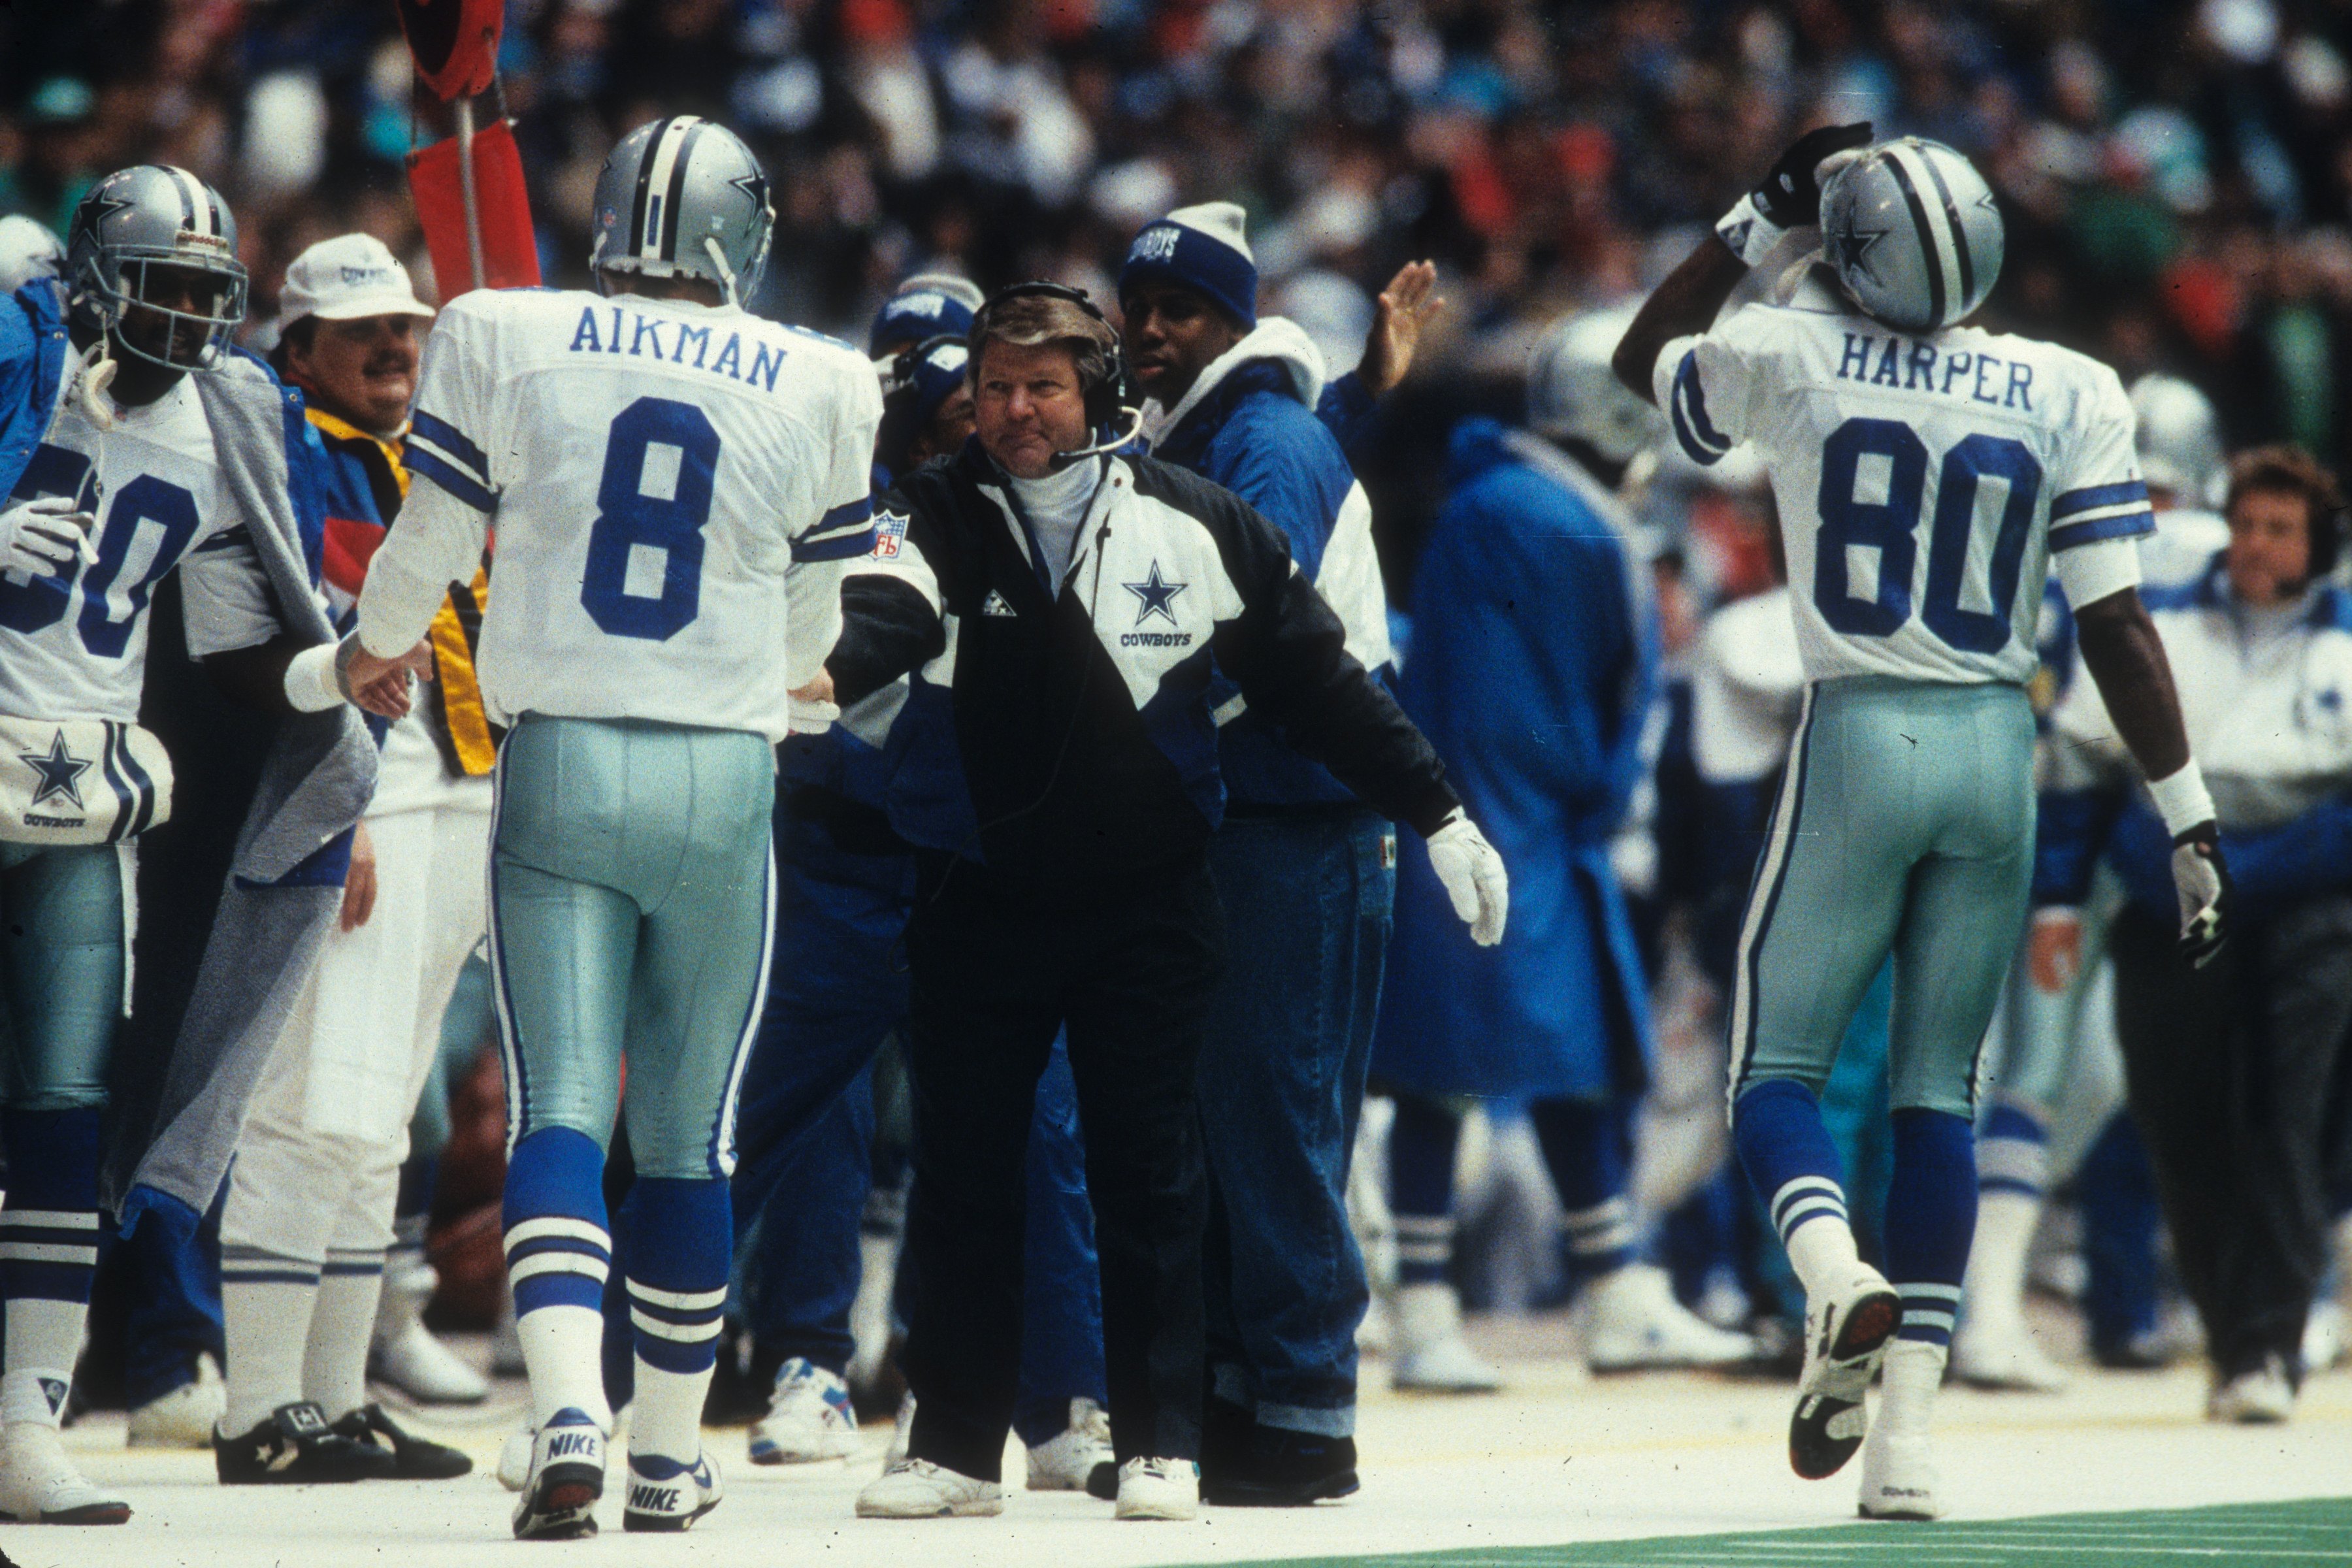 Troy Aikman Explains Why Jimmy Johnson Was a Great Coach but ‘Even Better as a Talent Evaluator’